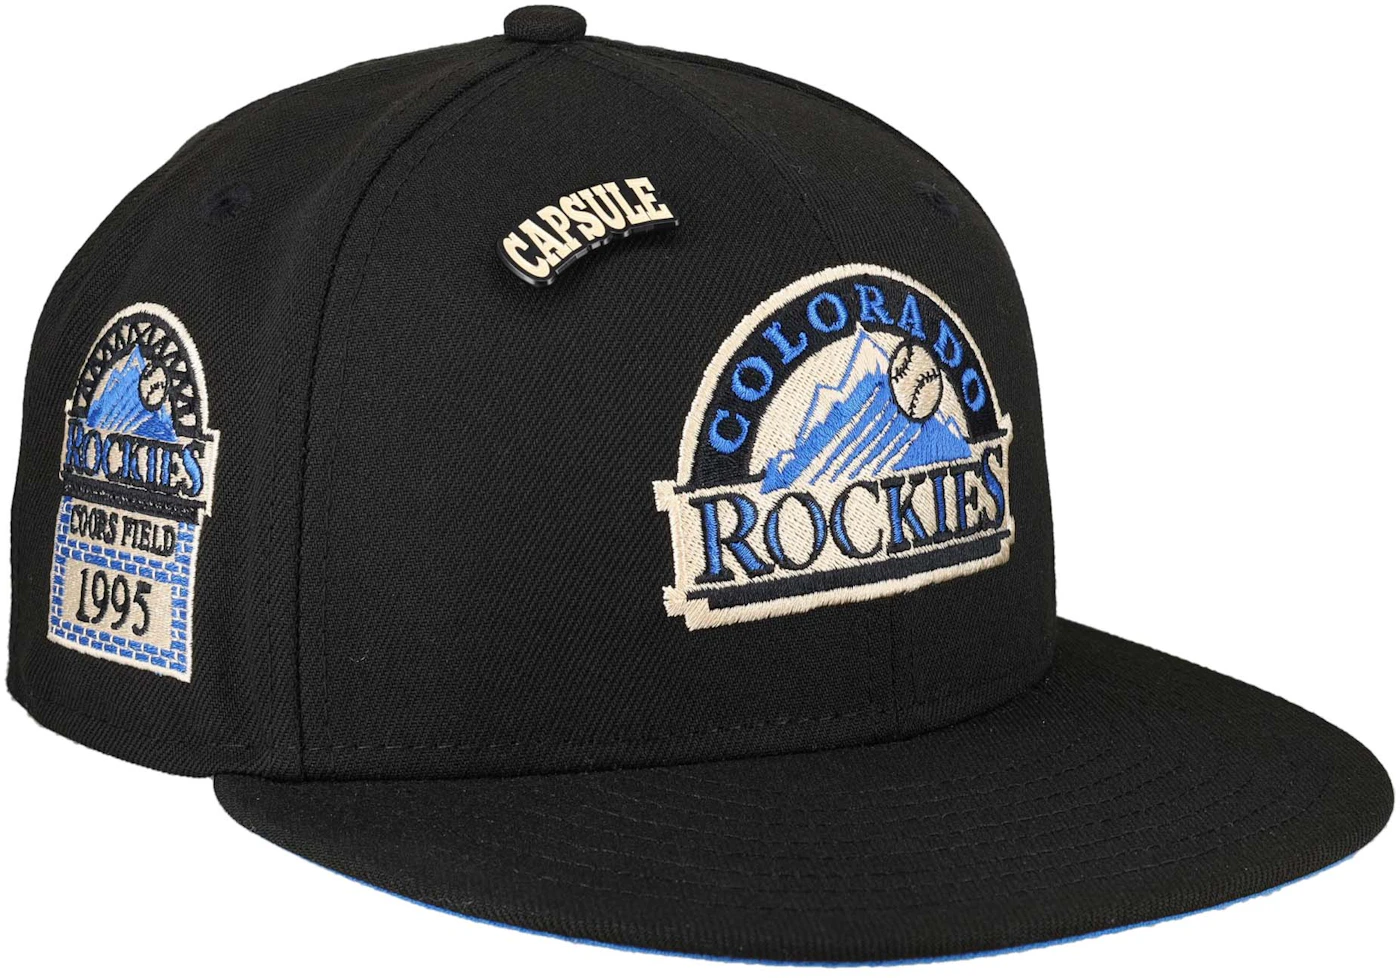 New Era Colorado Rockies Capsule Colors in Cream 1995 Coors Field Patch  59Fifty Fitted Hat Black/Blue Men's - US